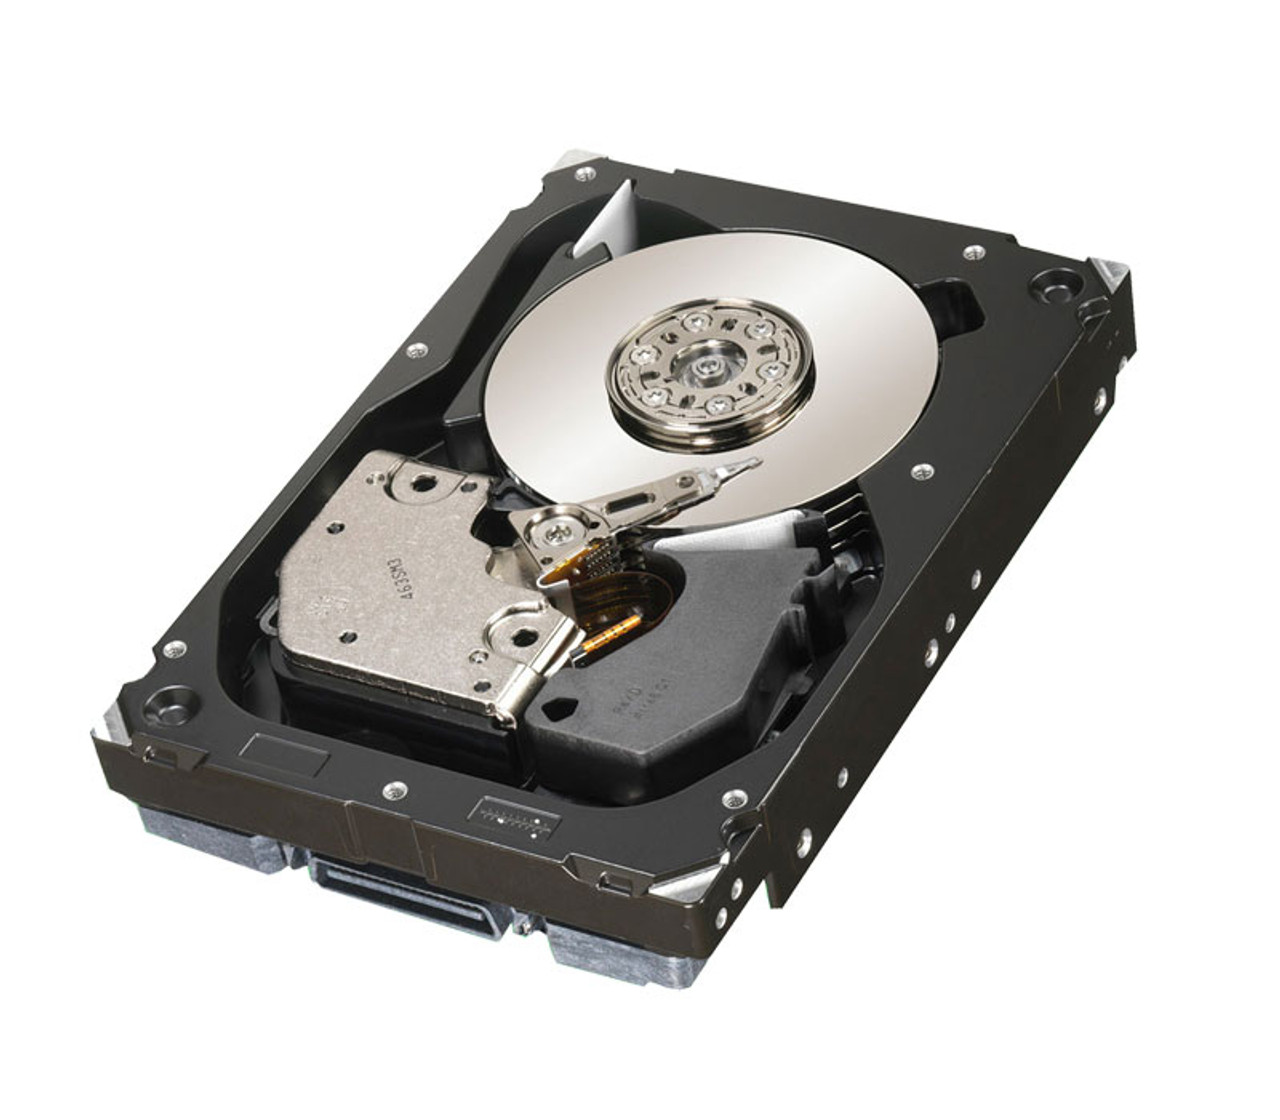 04D827 Dell 73.4GB 10000RPM Fibre Channel 2Gbps 4MB Cache 3.5-inch Internal Hard Drive